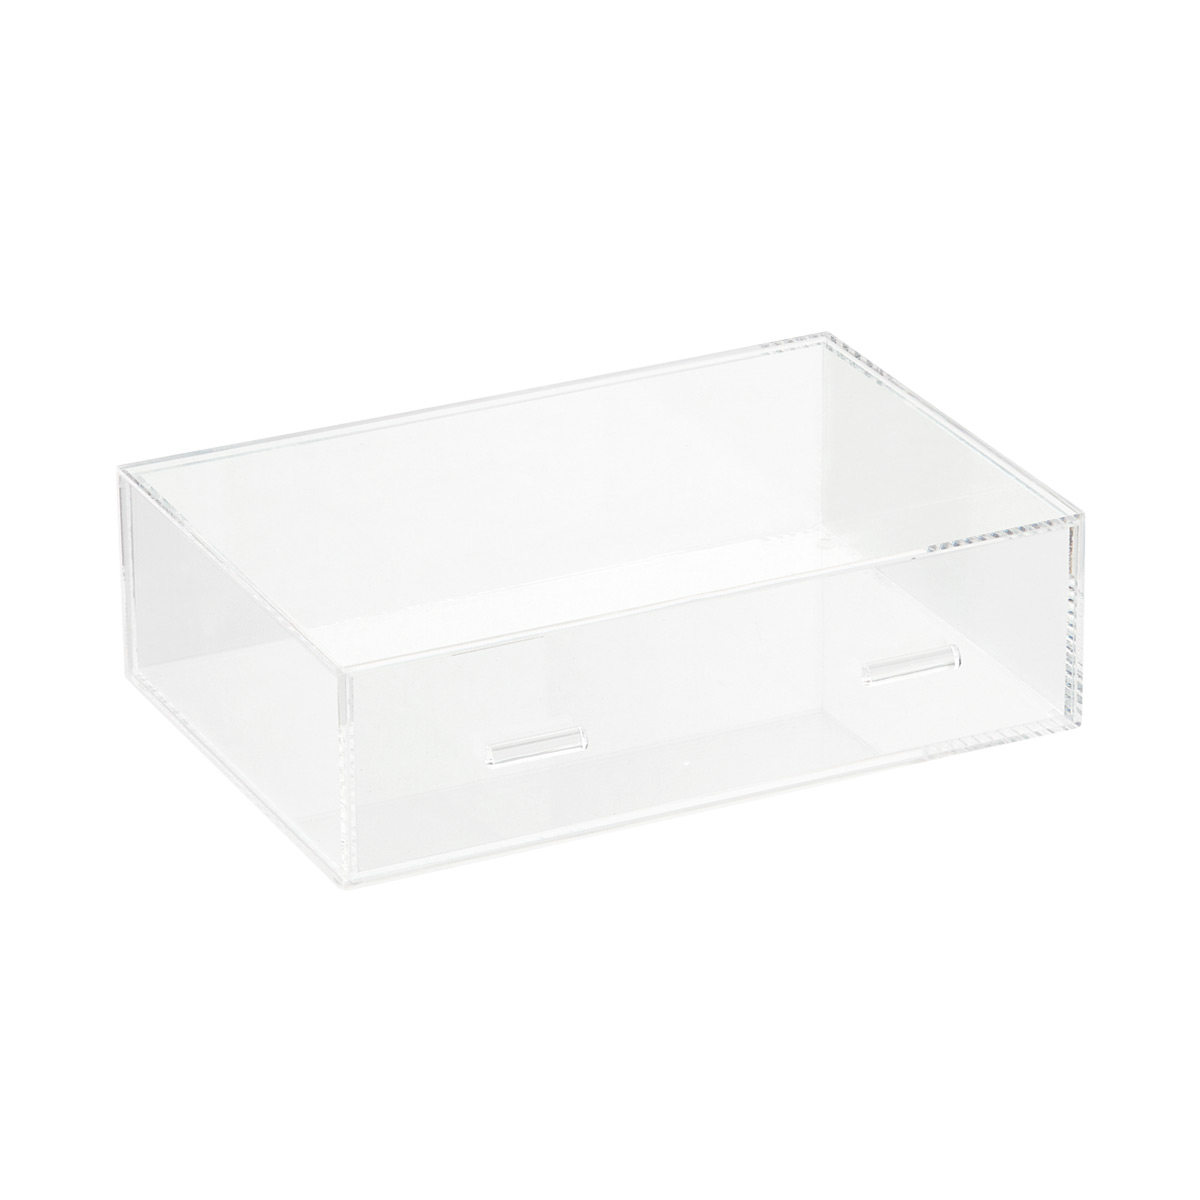 https://www.containerstore.com/catalogimages/321135/10072024-Luxe-acrylic-drawer-large-v.jpg